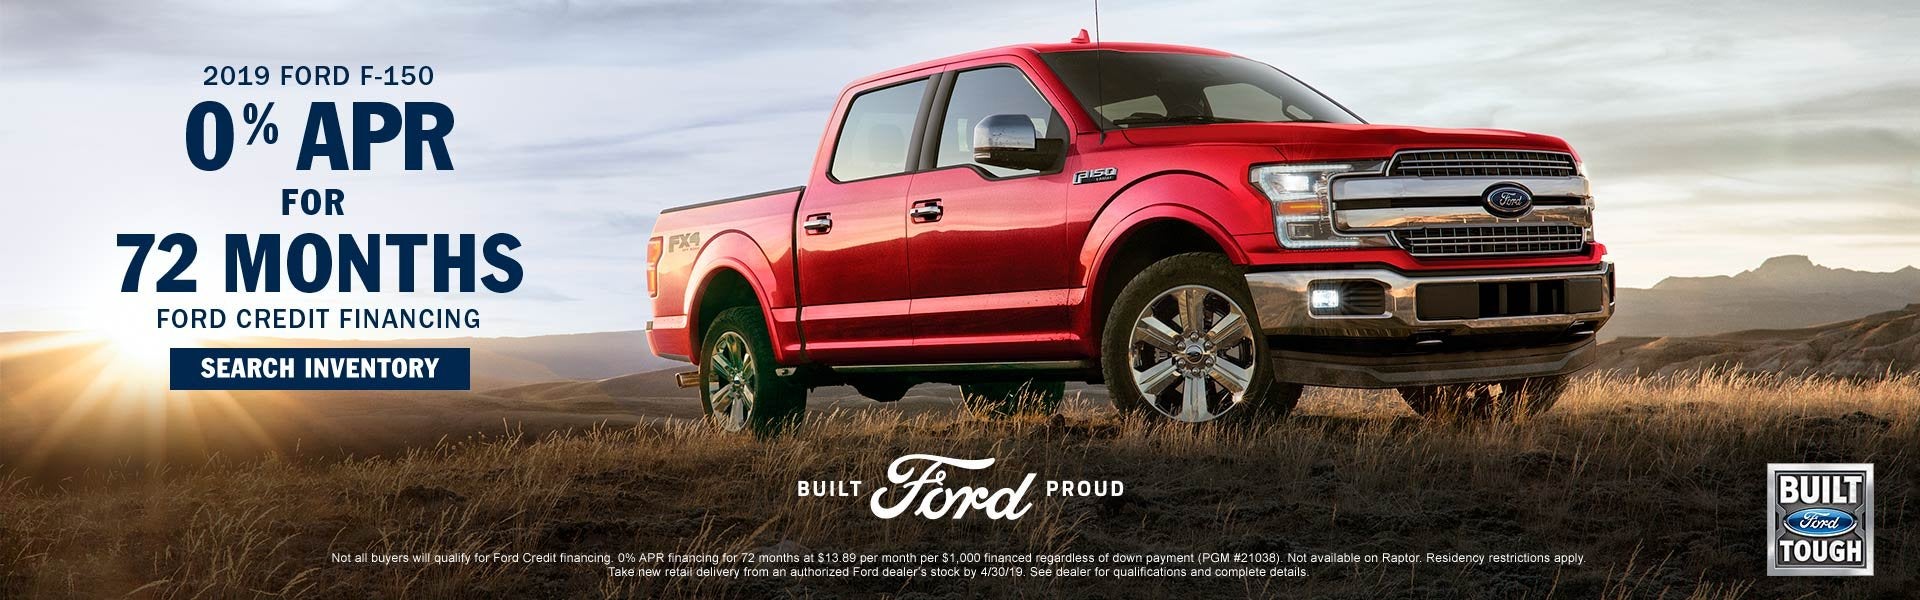 Ford New Car Specials in Norwalk, CT | McMahon Ford Price Specials